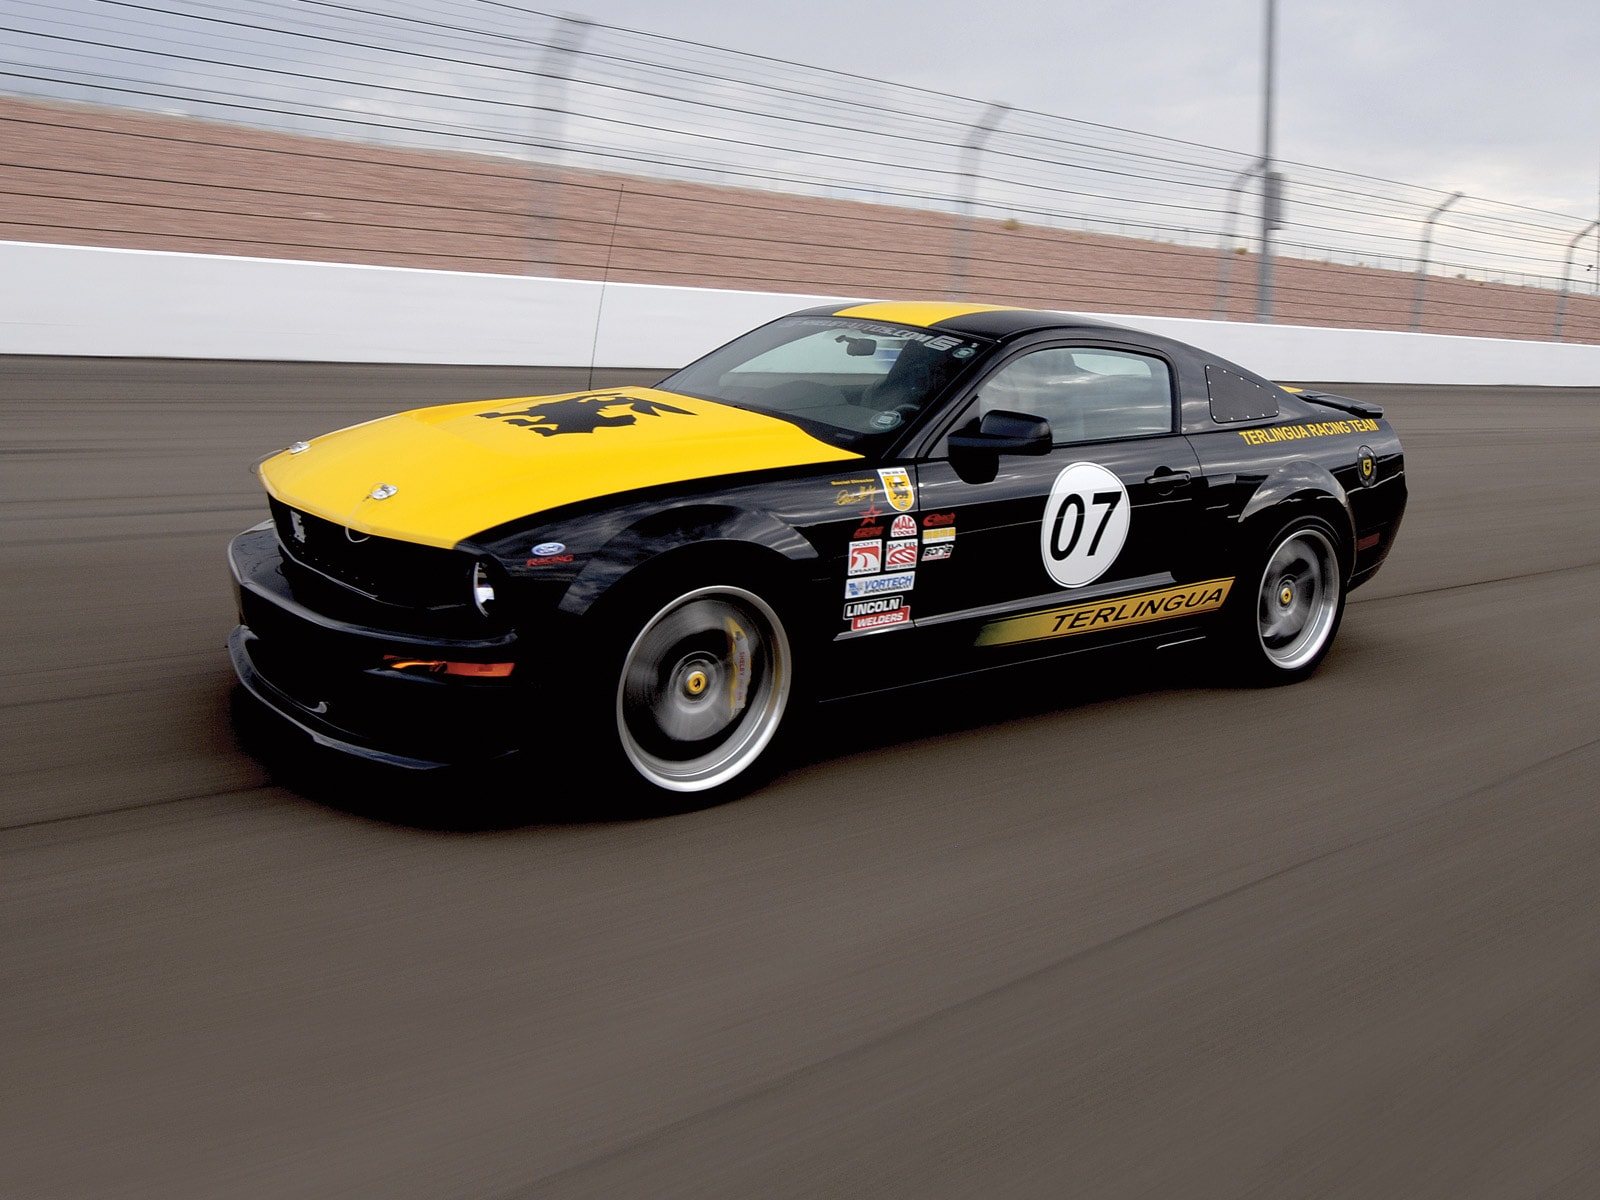 Mustang Of The Day: 2008 Ford Mustang Shelby Terlingua